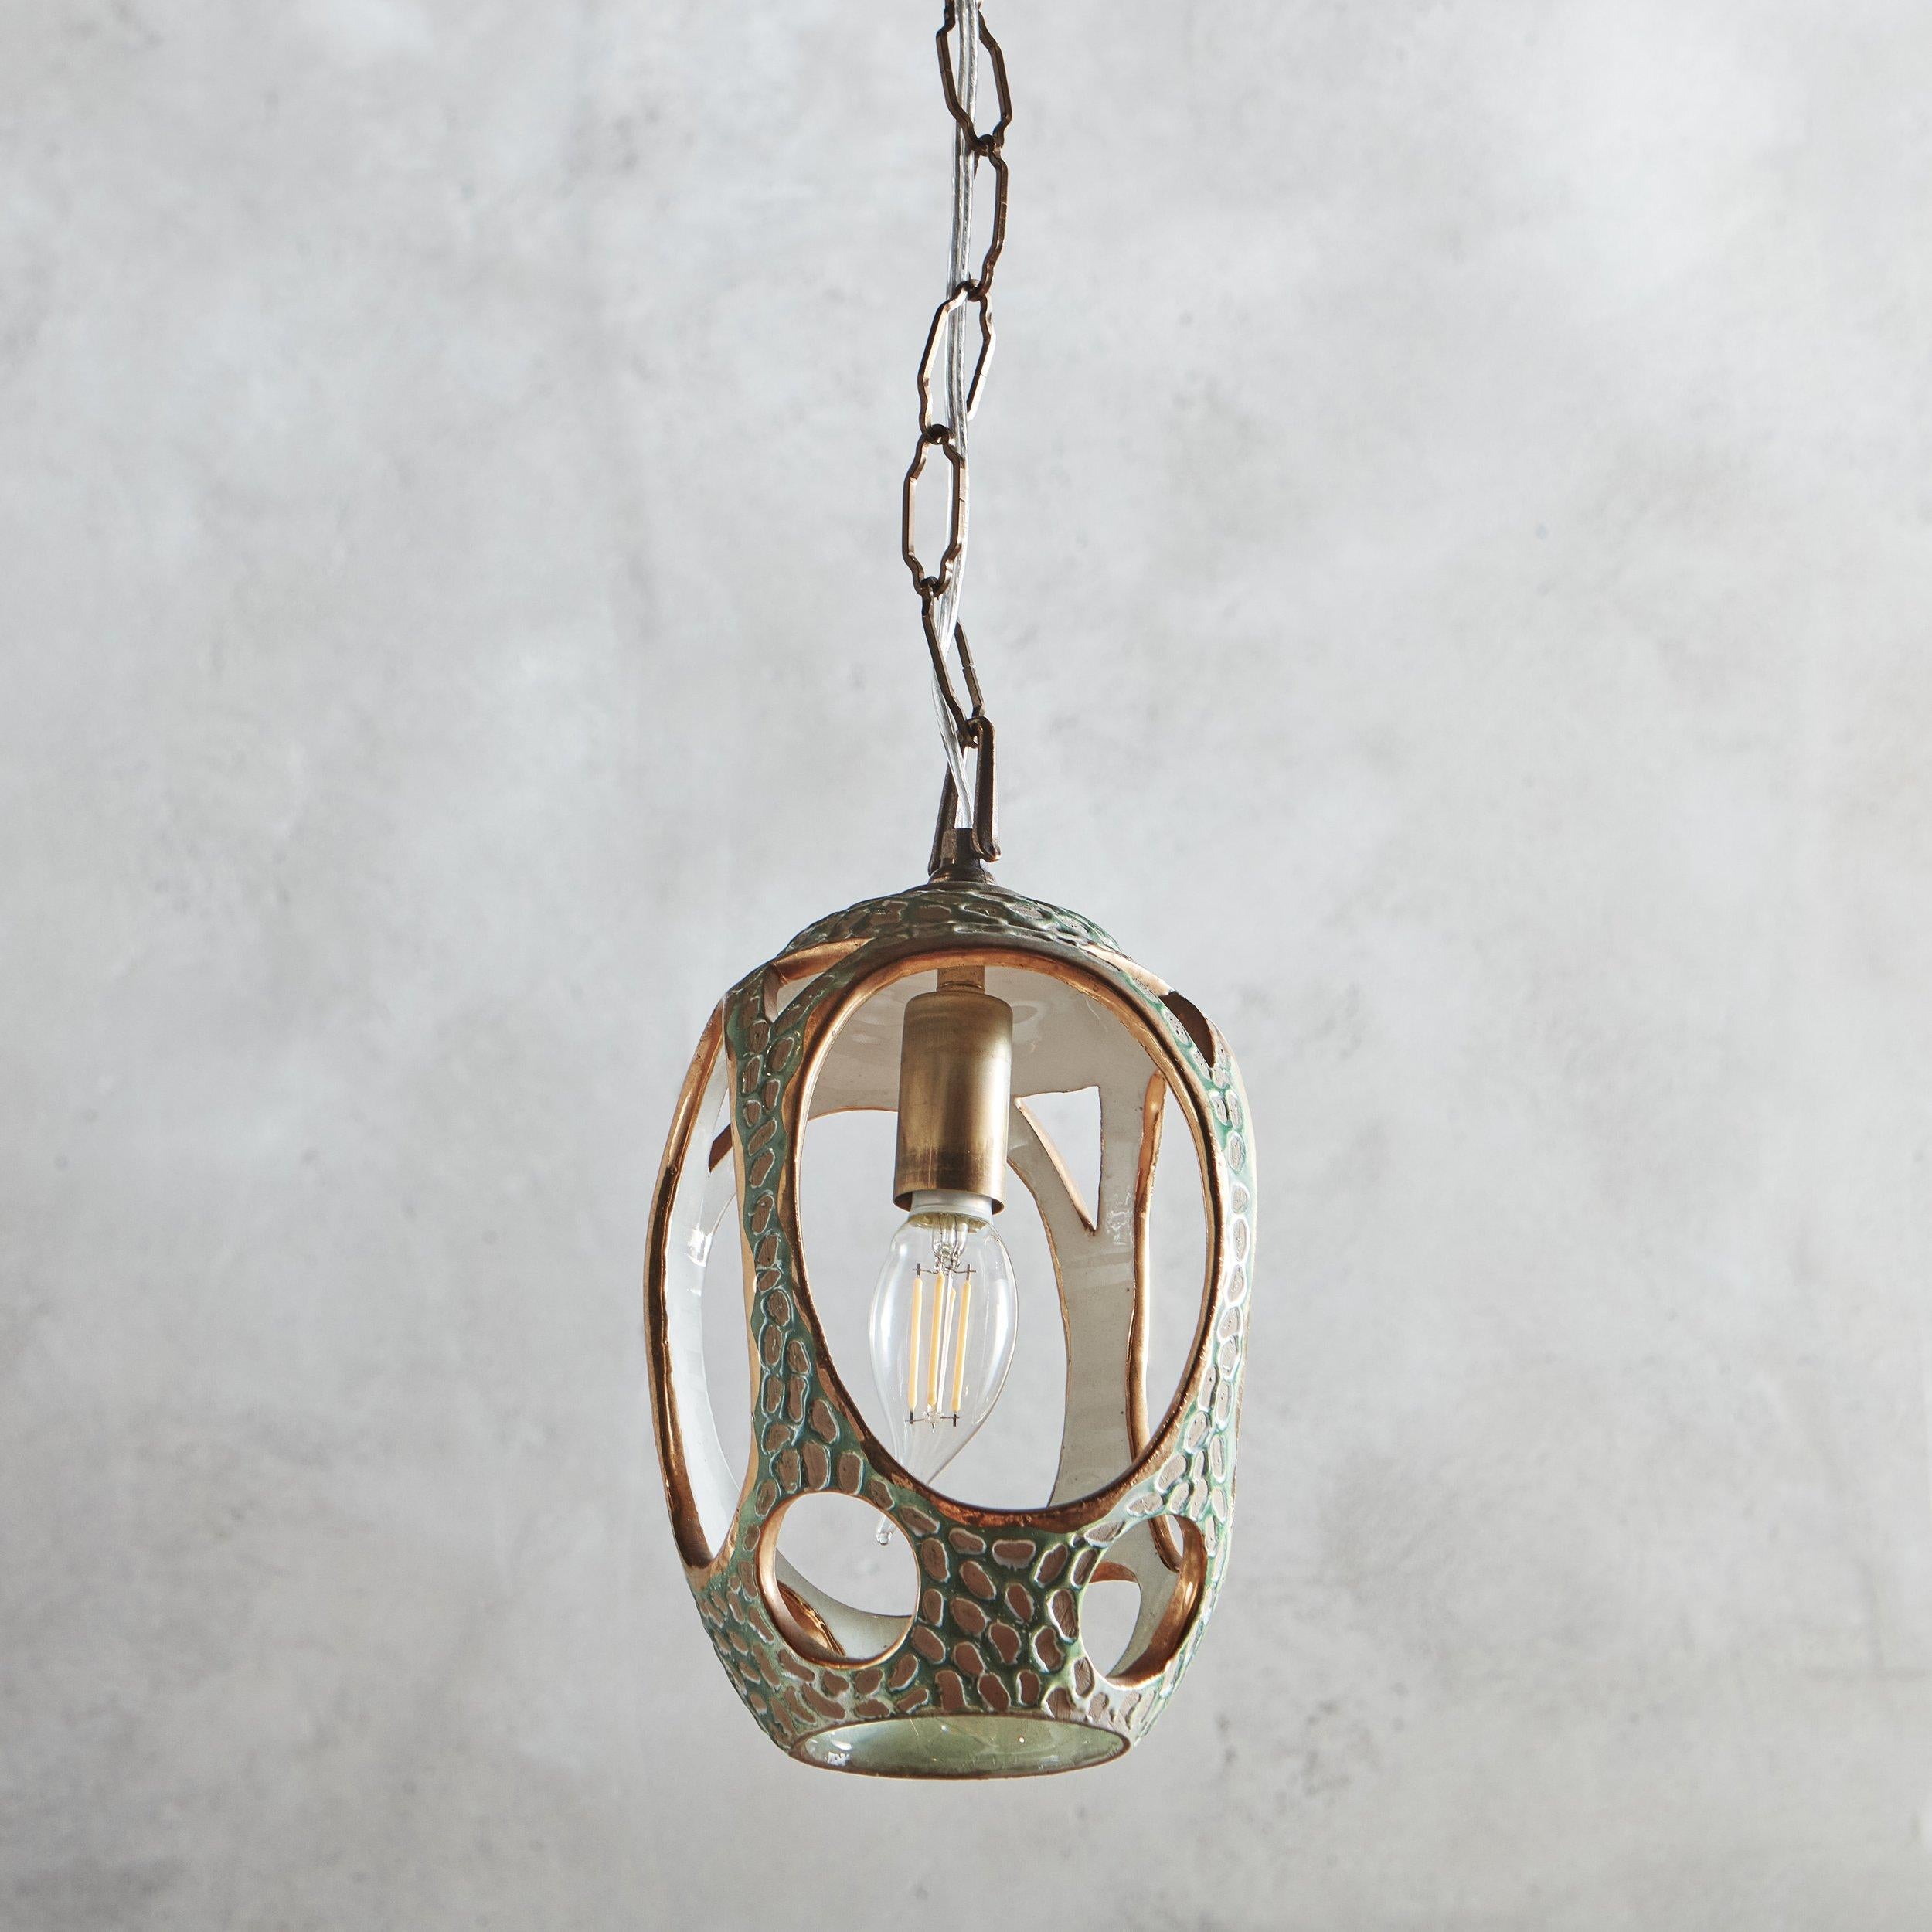 A 1950s glazed ceramic pendant light by Danish pottery company Zenith Gouda with oval and circular cutout details on the sides and base. This fixture has gold detailing and a textural exterior in a vivid green hue, which contrasts beautifully with